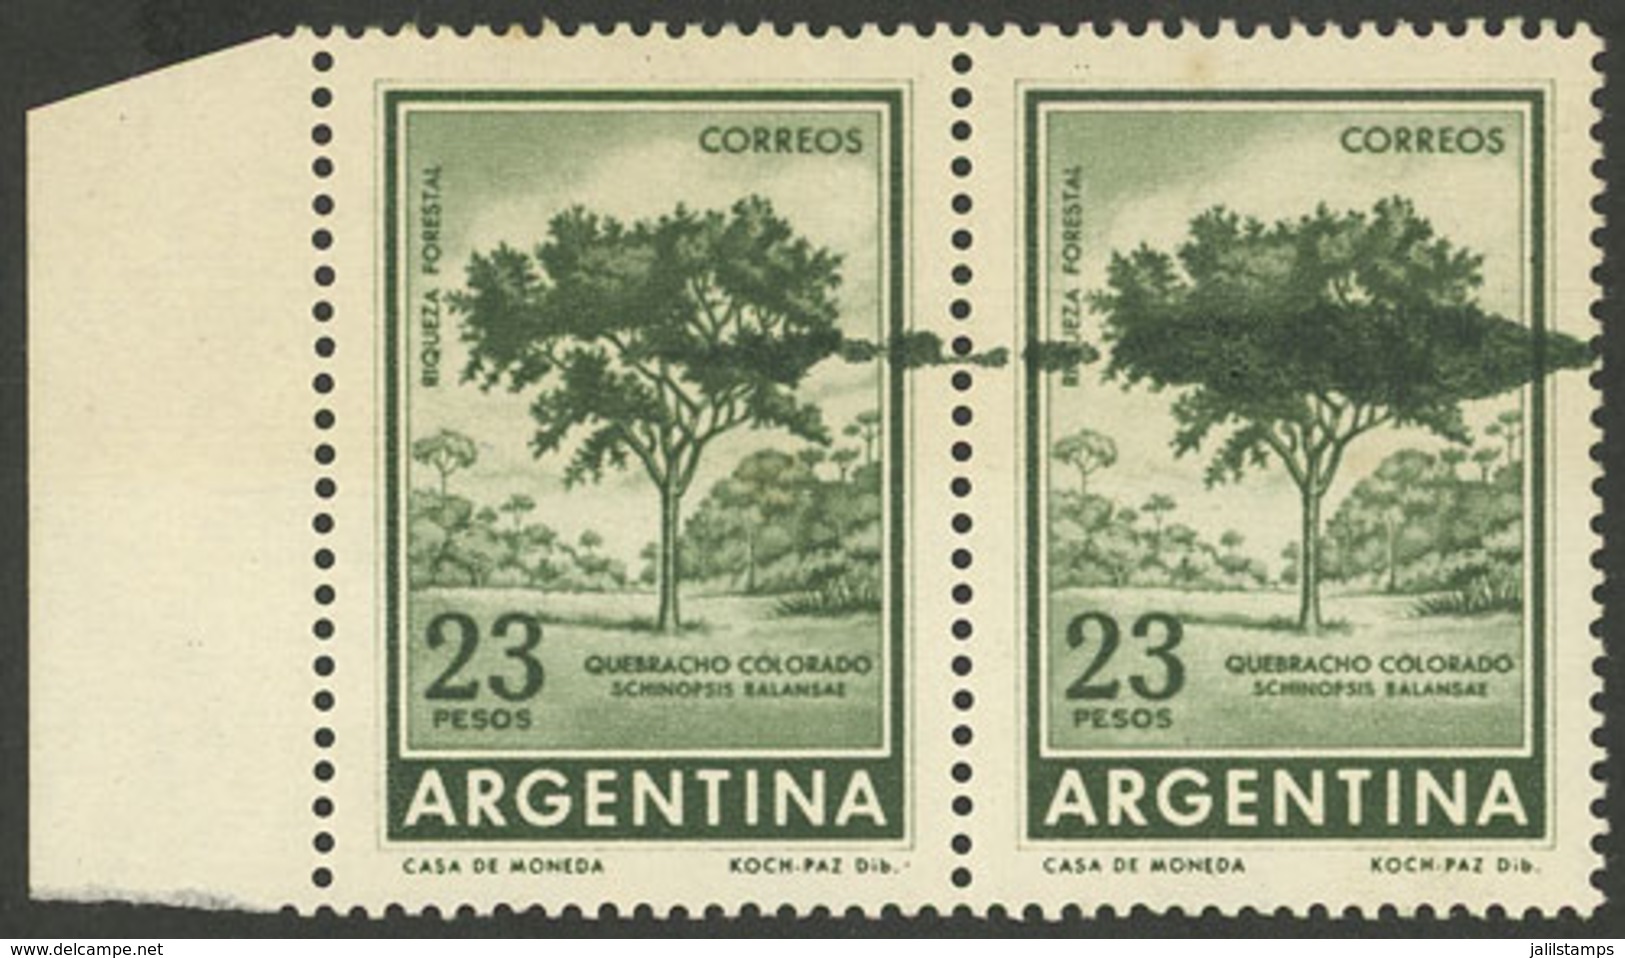 ARGENTINA: GJ.1311, Pair With Notable Ink Spot Produced During The Printing Process, Excellent Quality! - Neufs